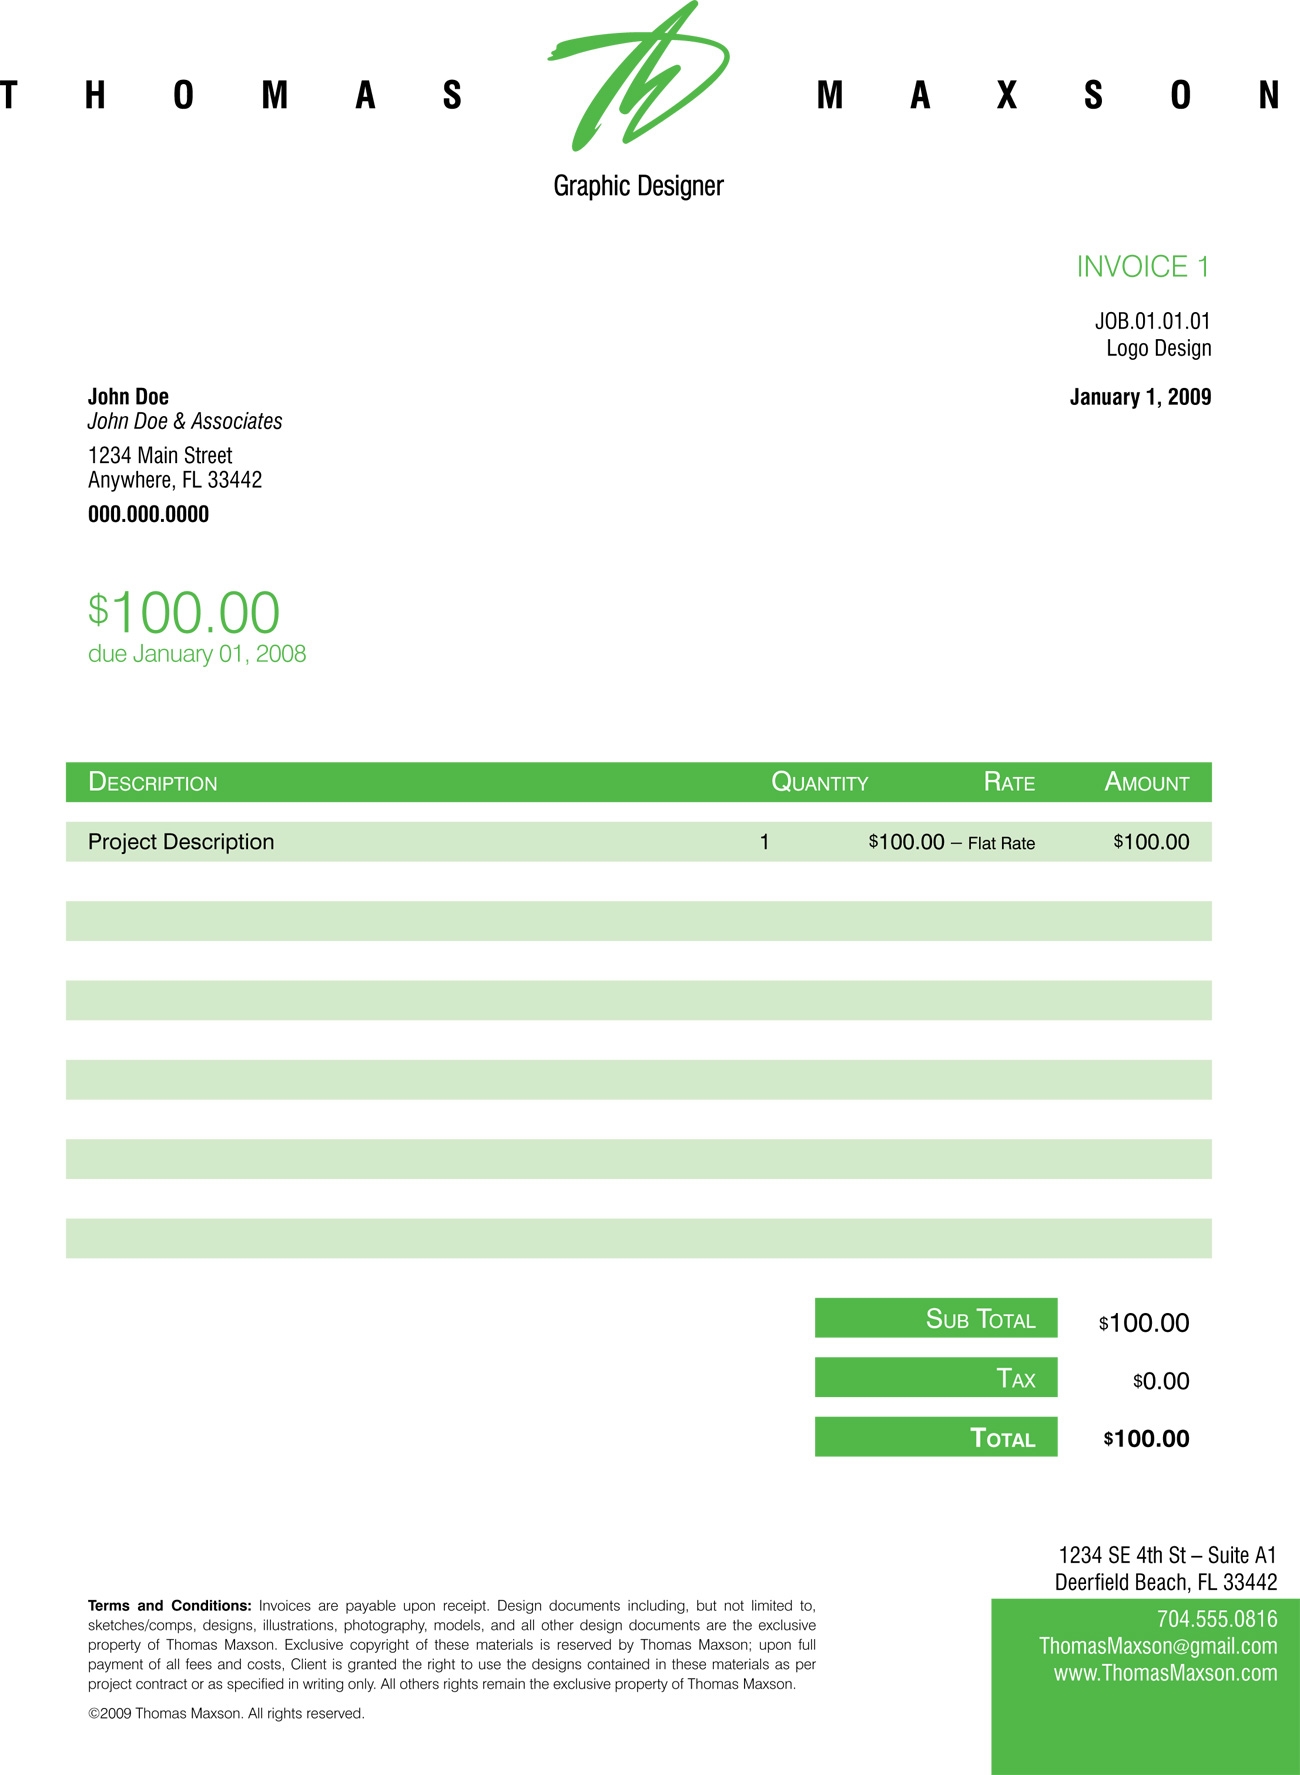 recycled newz invoice like a pro examples amp best practices design invoice example